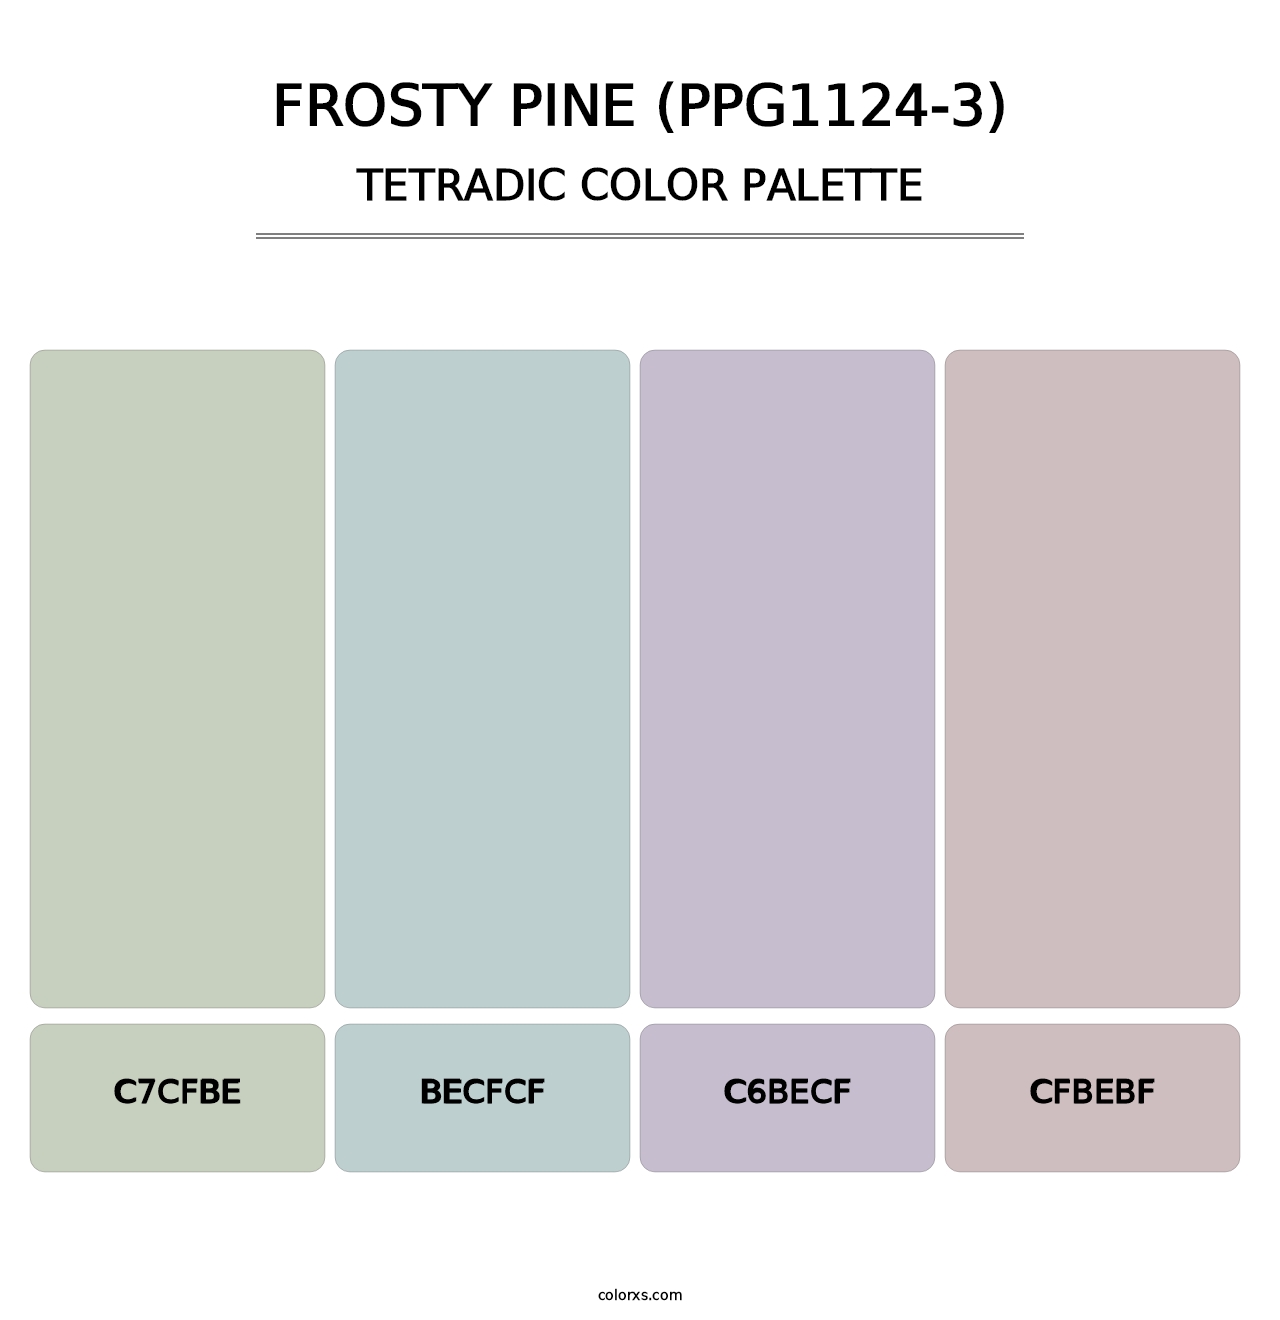 Frosty Pine (PPG1124-3) - Tetradic Color Palette